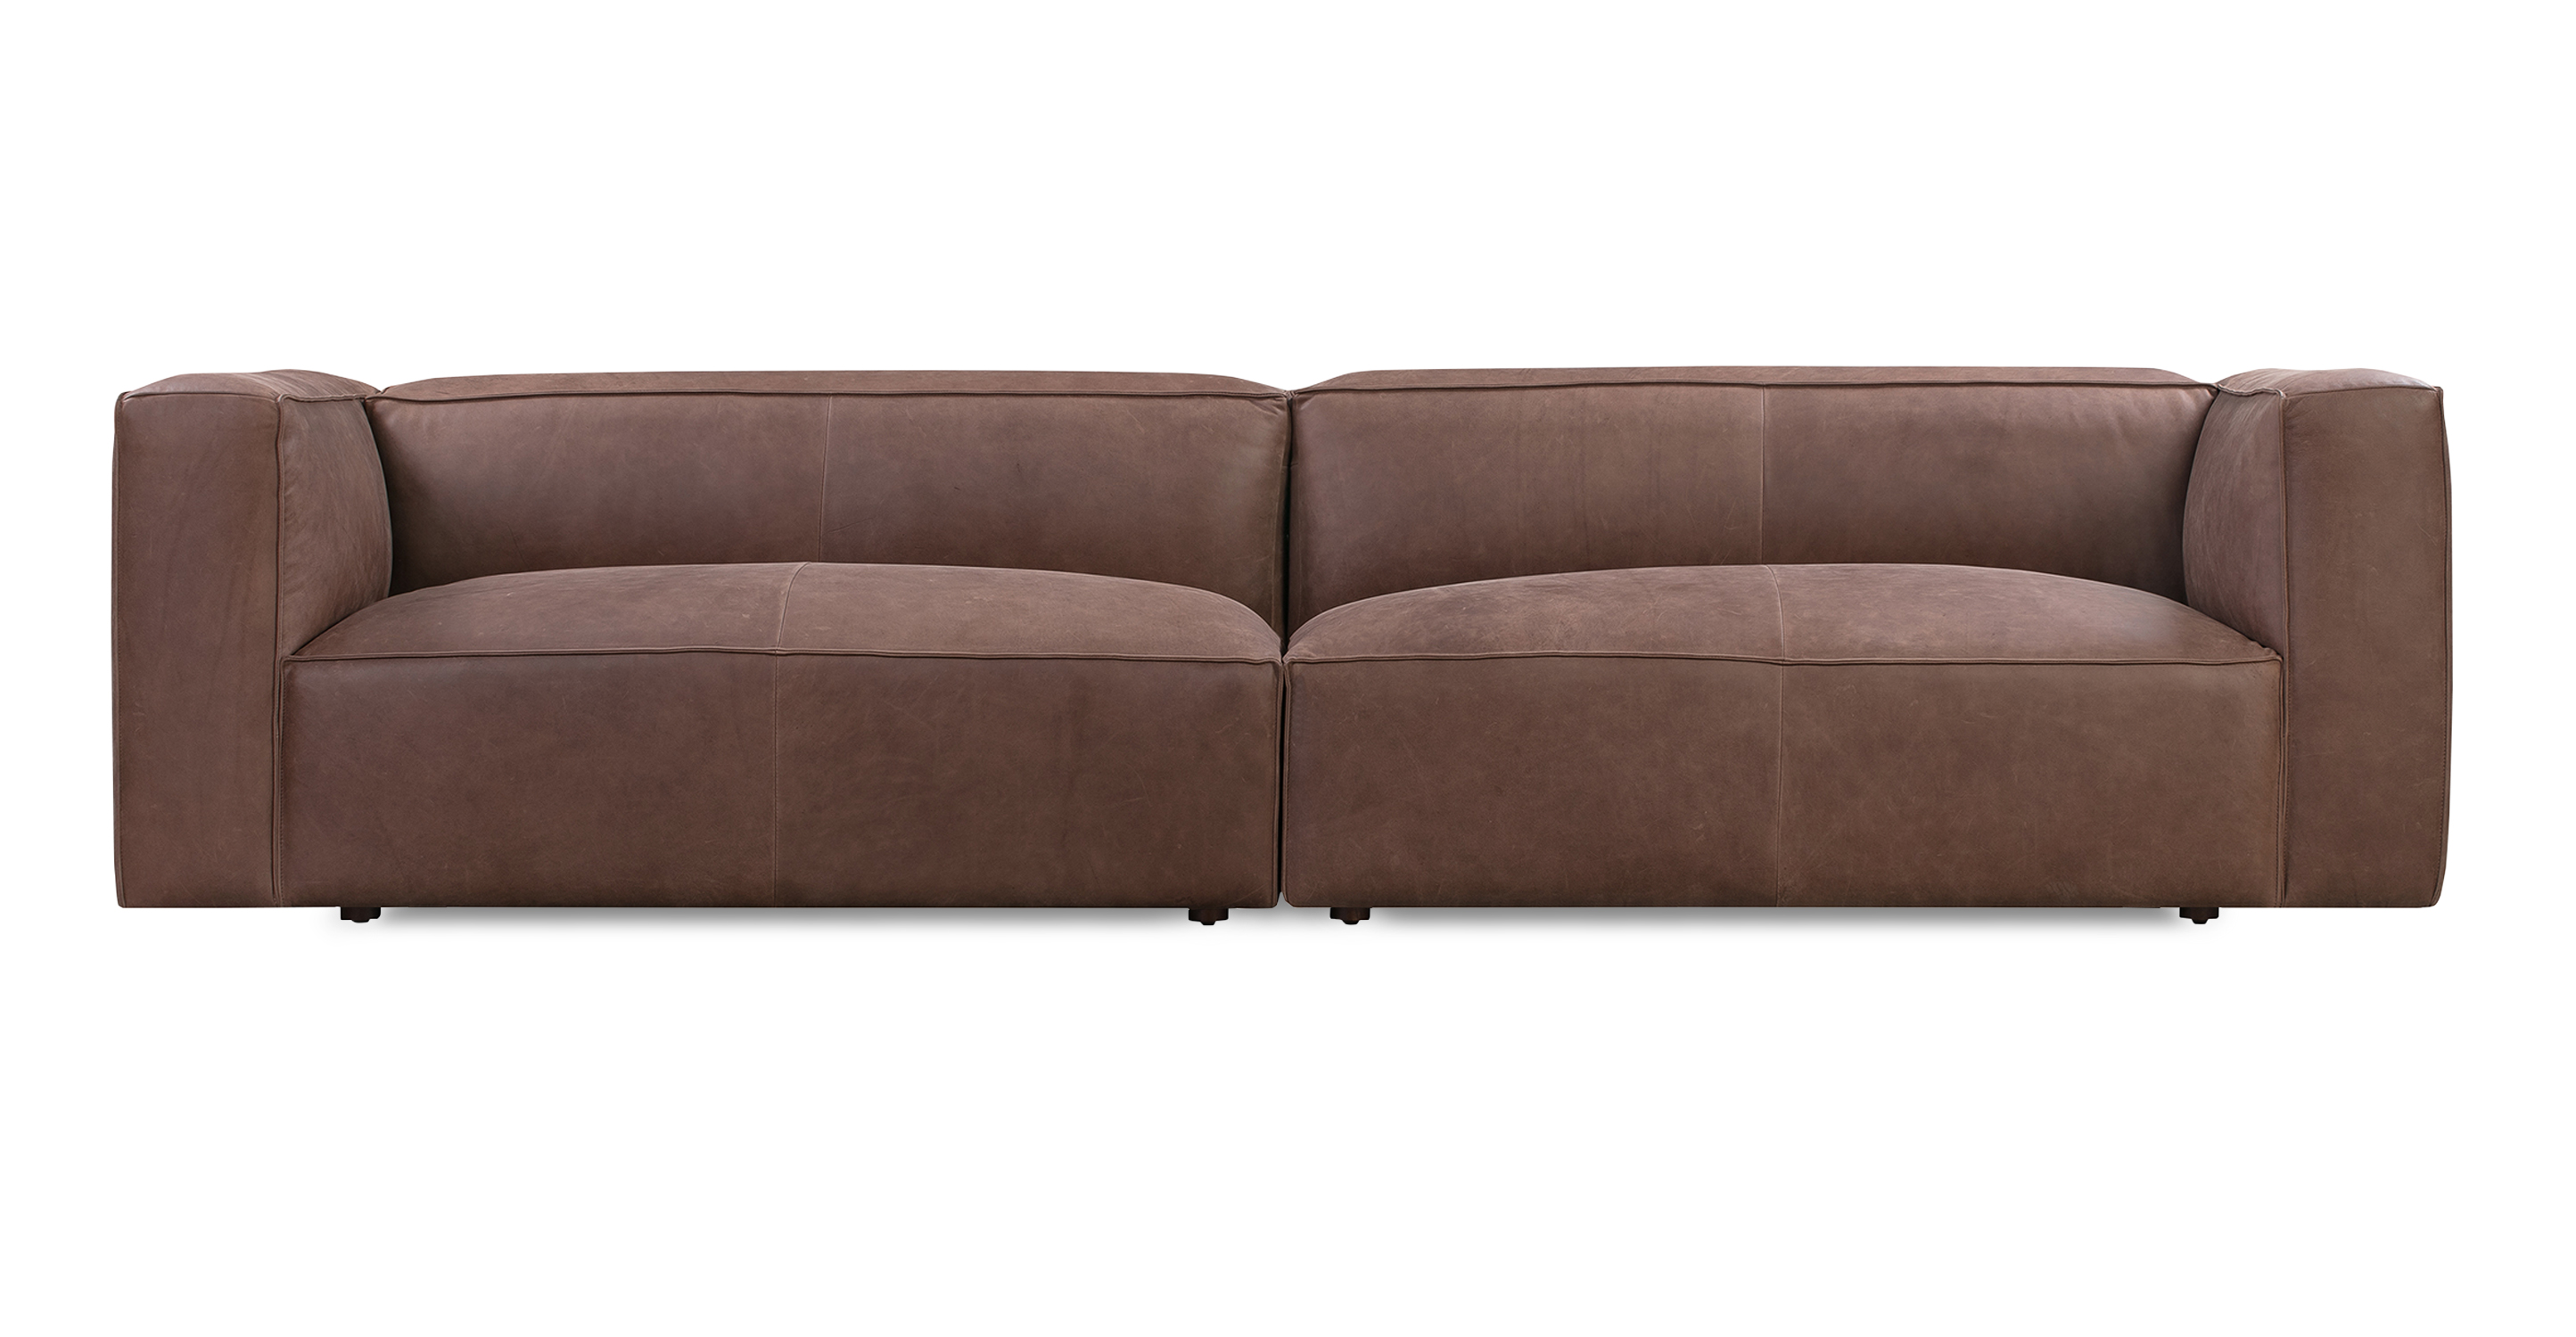 Soho Mocha 110 sofa has a modern and sleek low profile. The sofa part of a modular set, two separate single arm sofas are used to create one large open sofa. This series is supported by small black legs that allow the sofa to be close to the floor without touching. The sofa seat cushion is one thick solid piece, the arms and back are rectangle in shape. All the cushion edges are finished in piping and have interest seams to visually divide up the one seat cushion. 